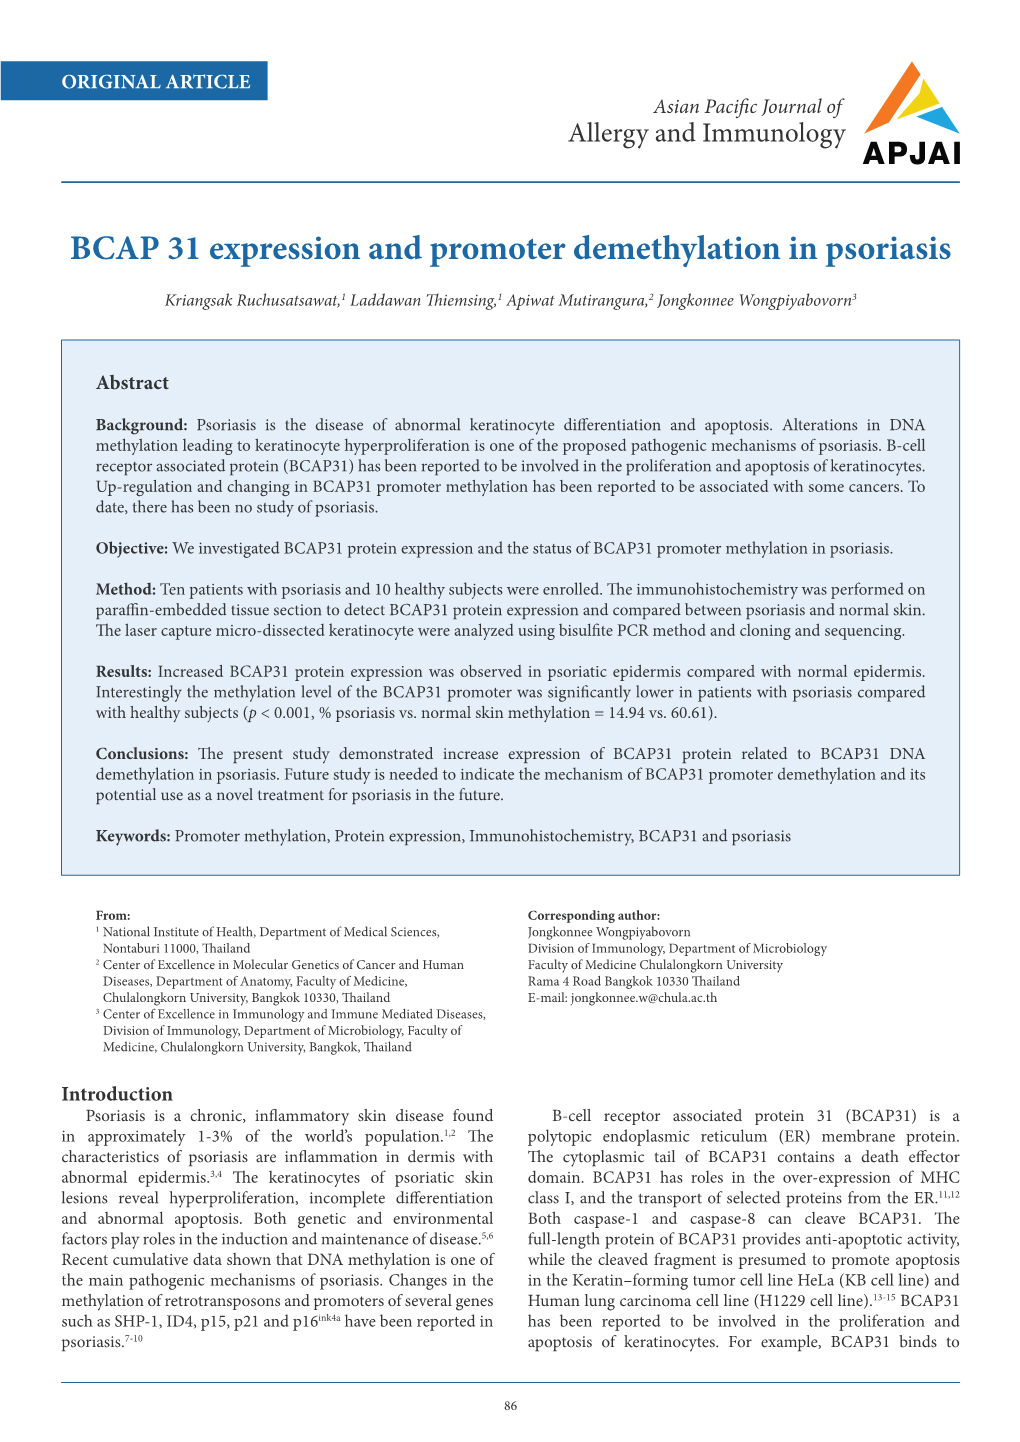 BCAP 31 Expression and Promoter Demethylation in Psoriasis